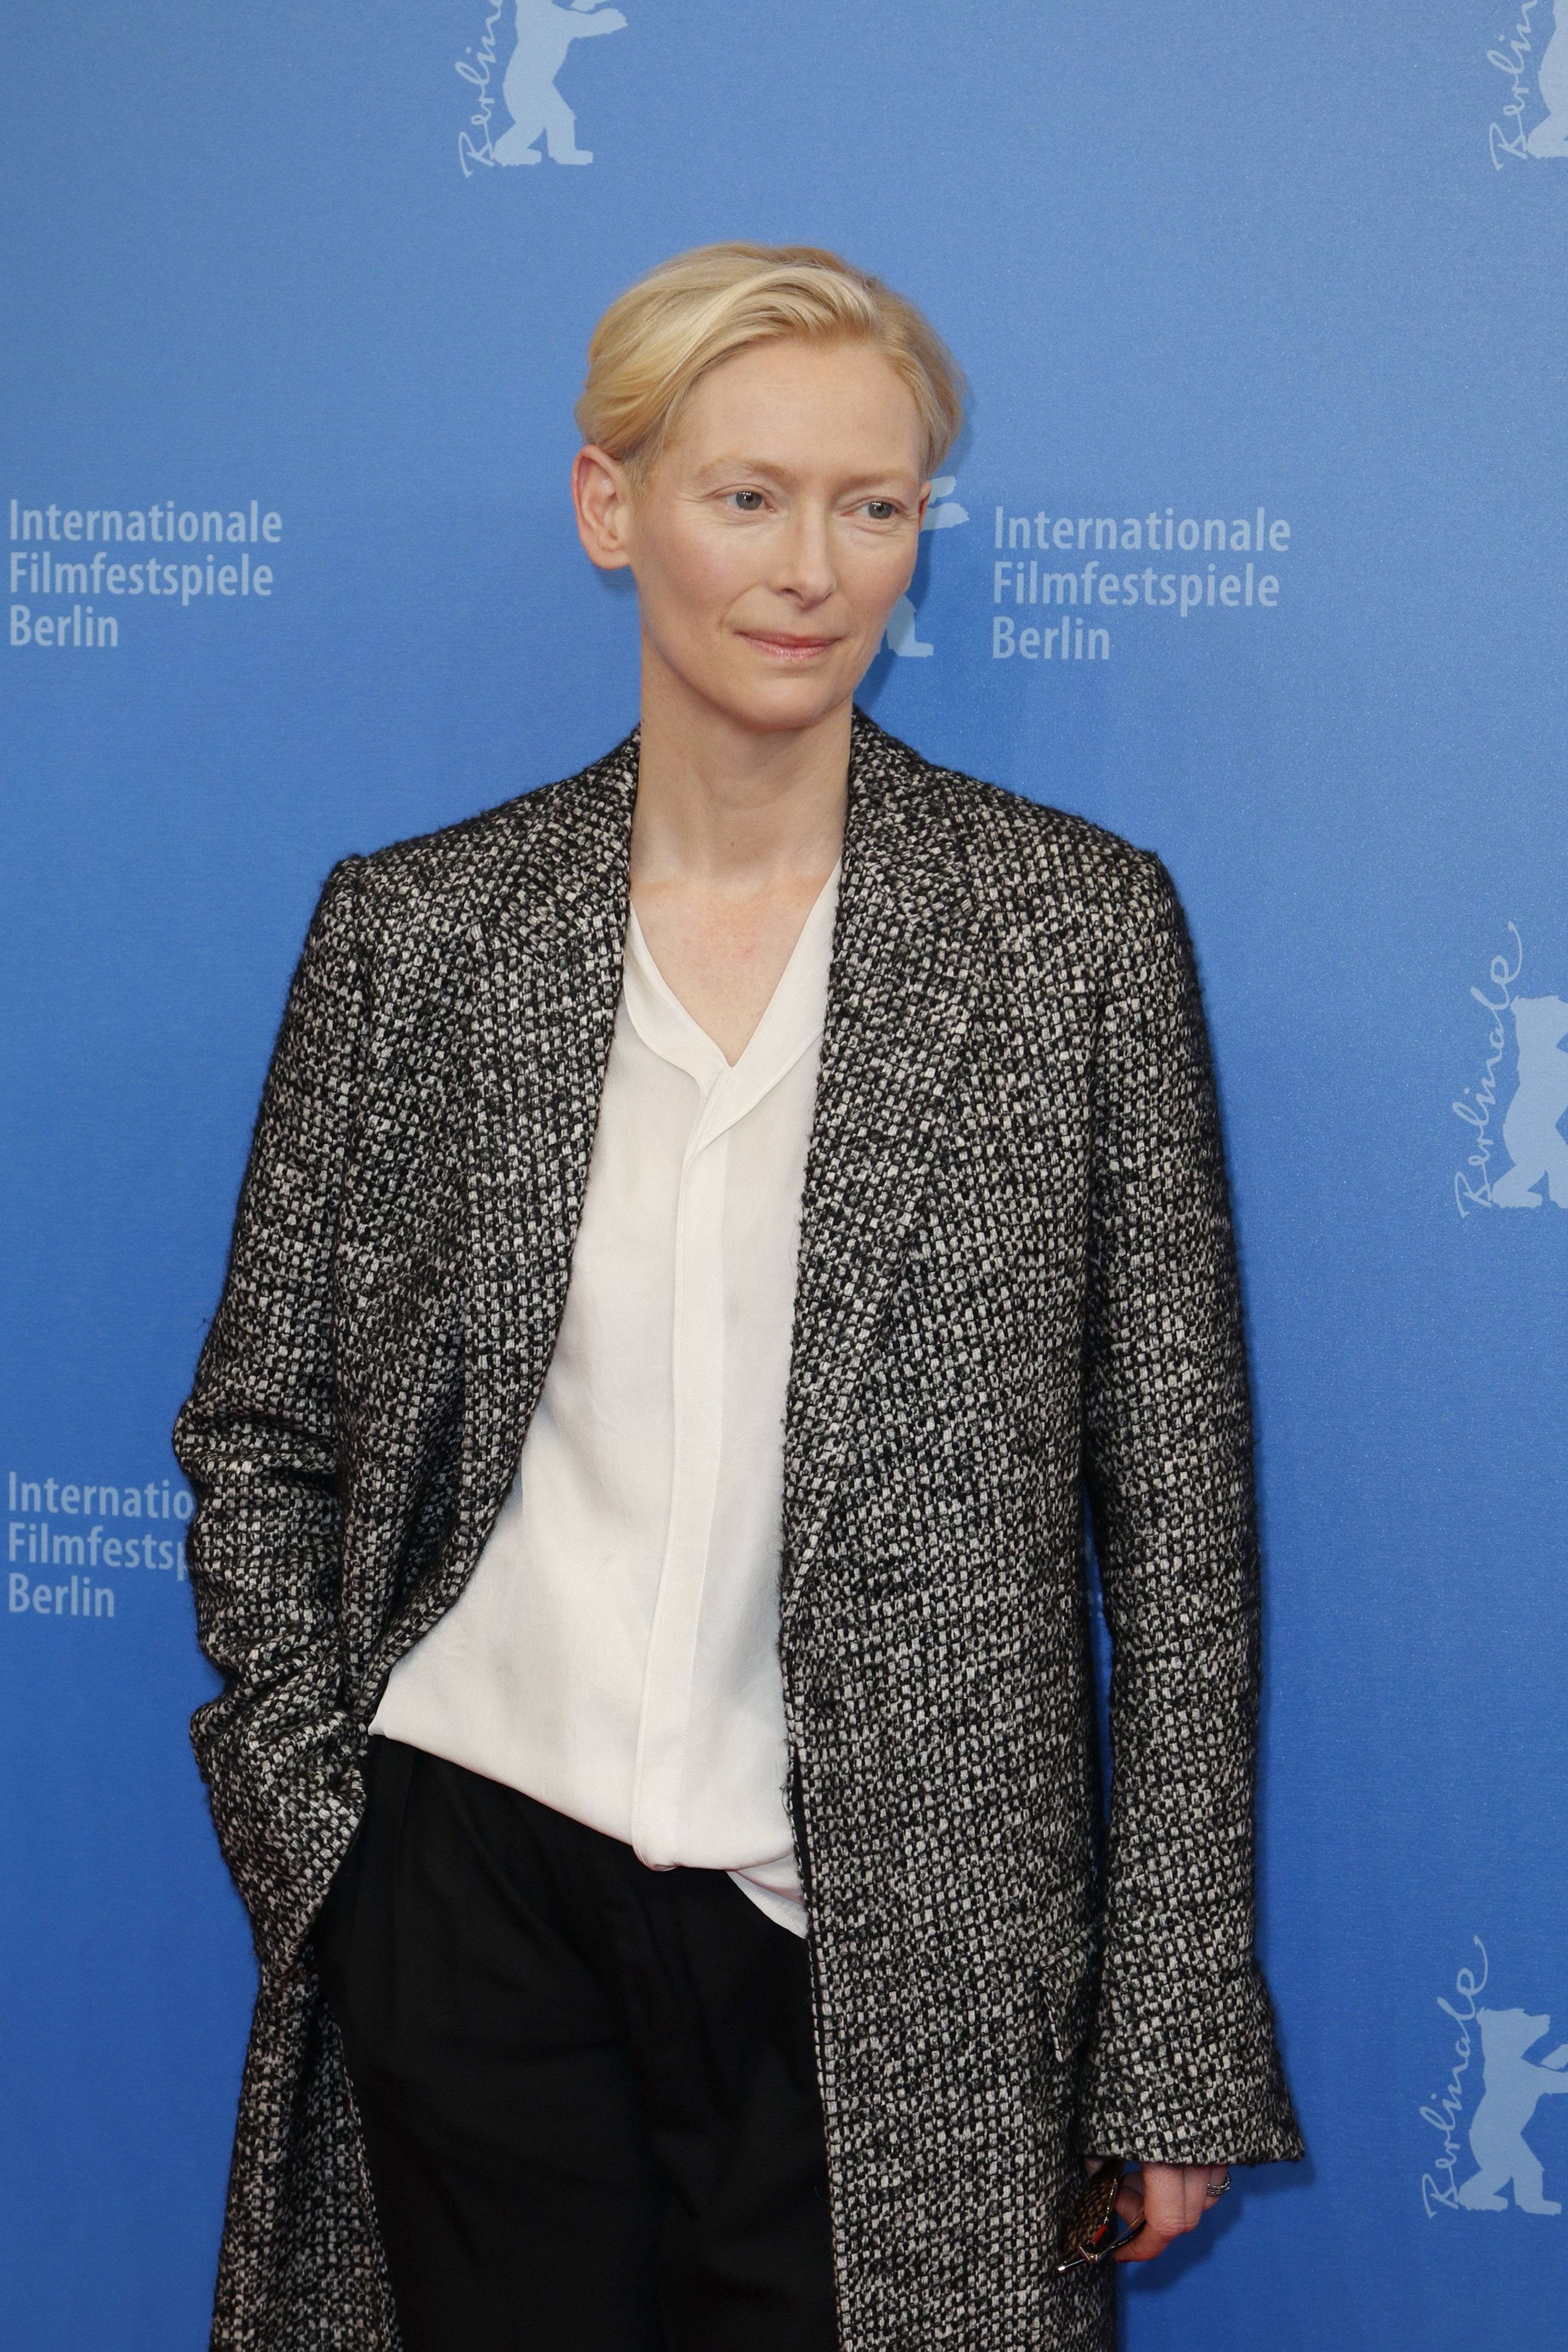 Tilda Swinton at the Berlin International Film Festival in February. The actress is mired in controversy for her role in Doctor Strange, as a Tibetan monk named the Ancient One. Photo: TNS